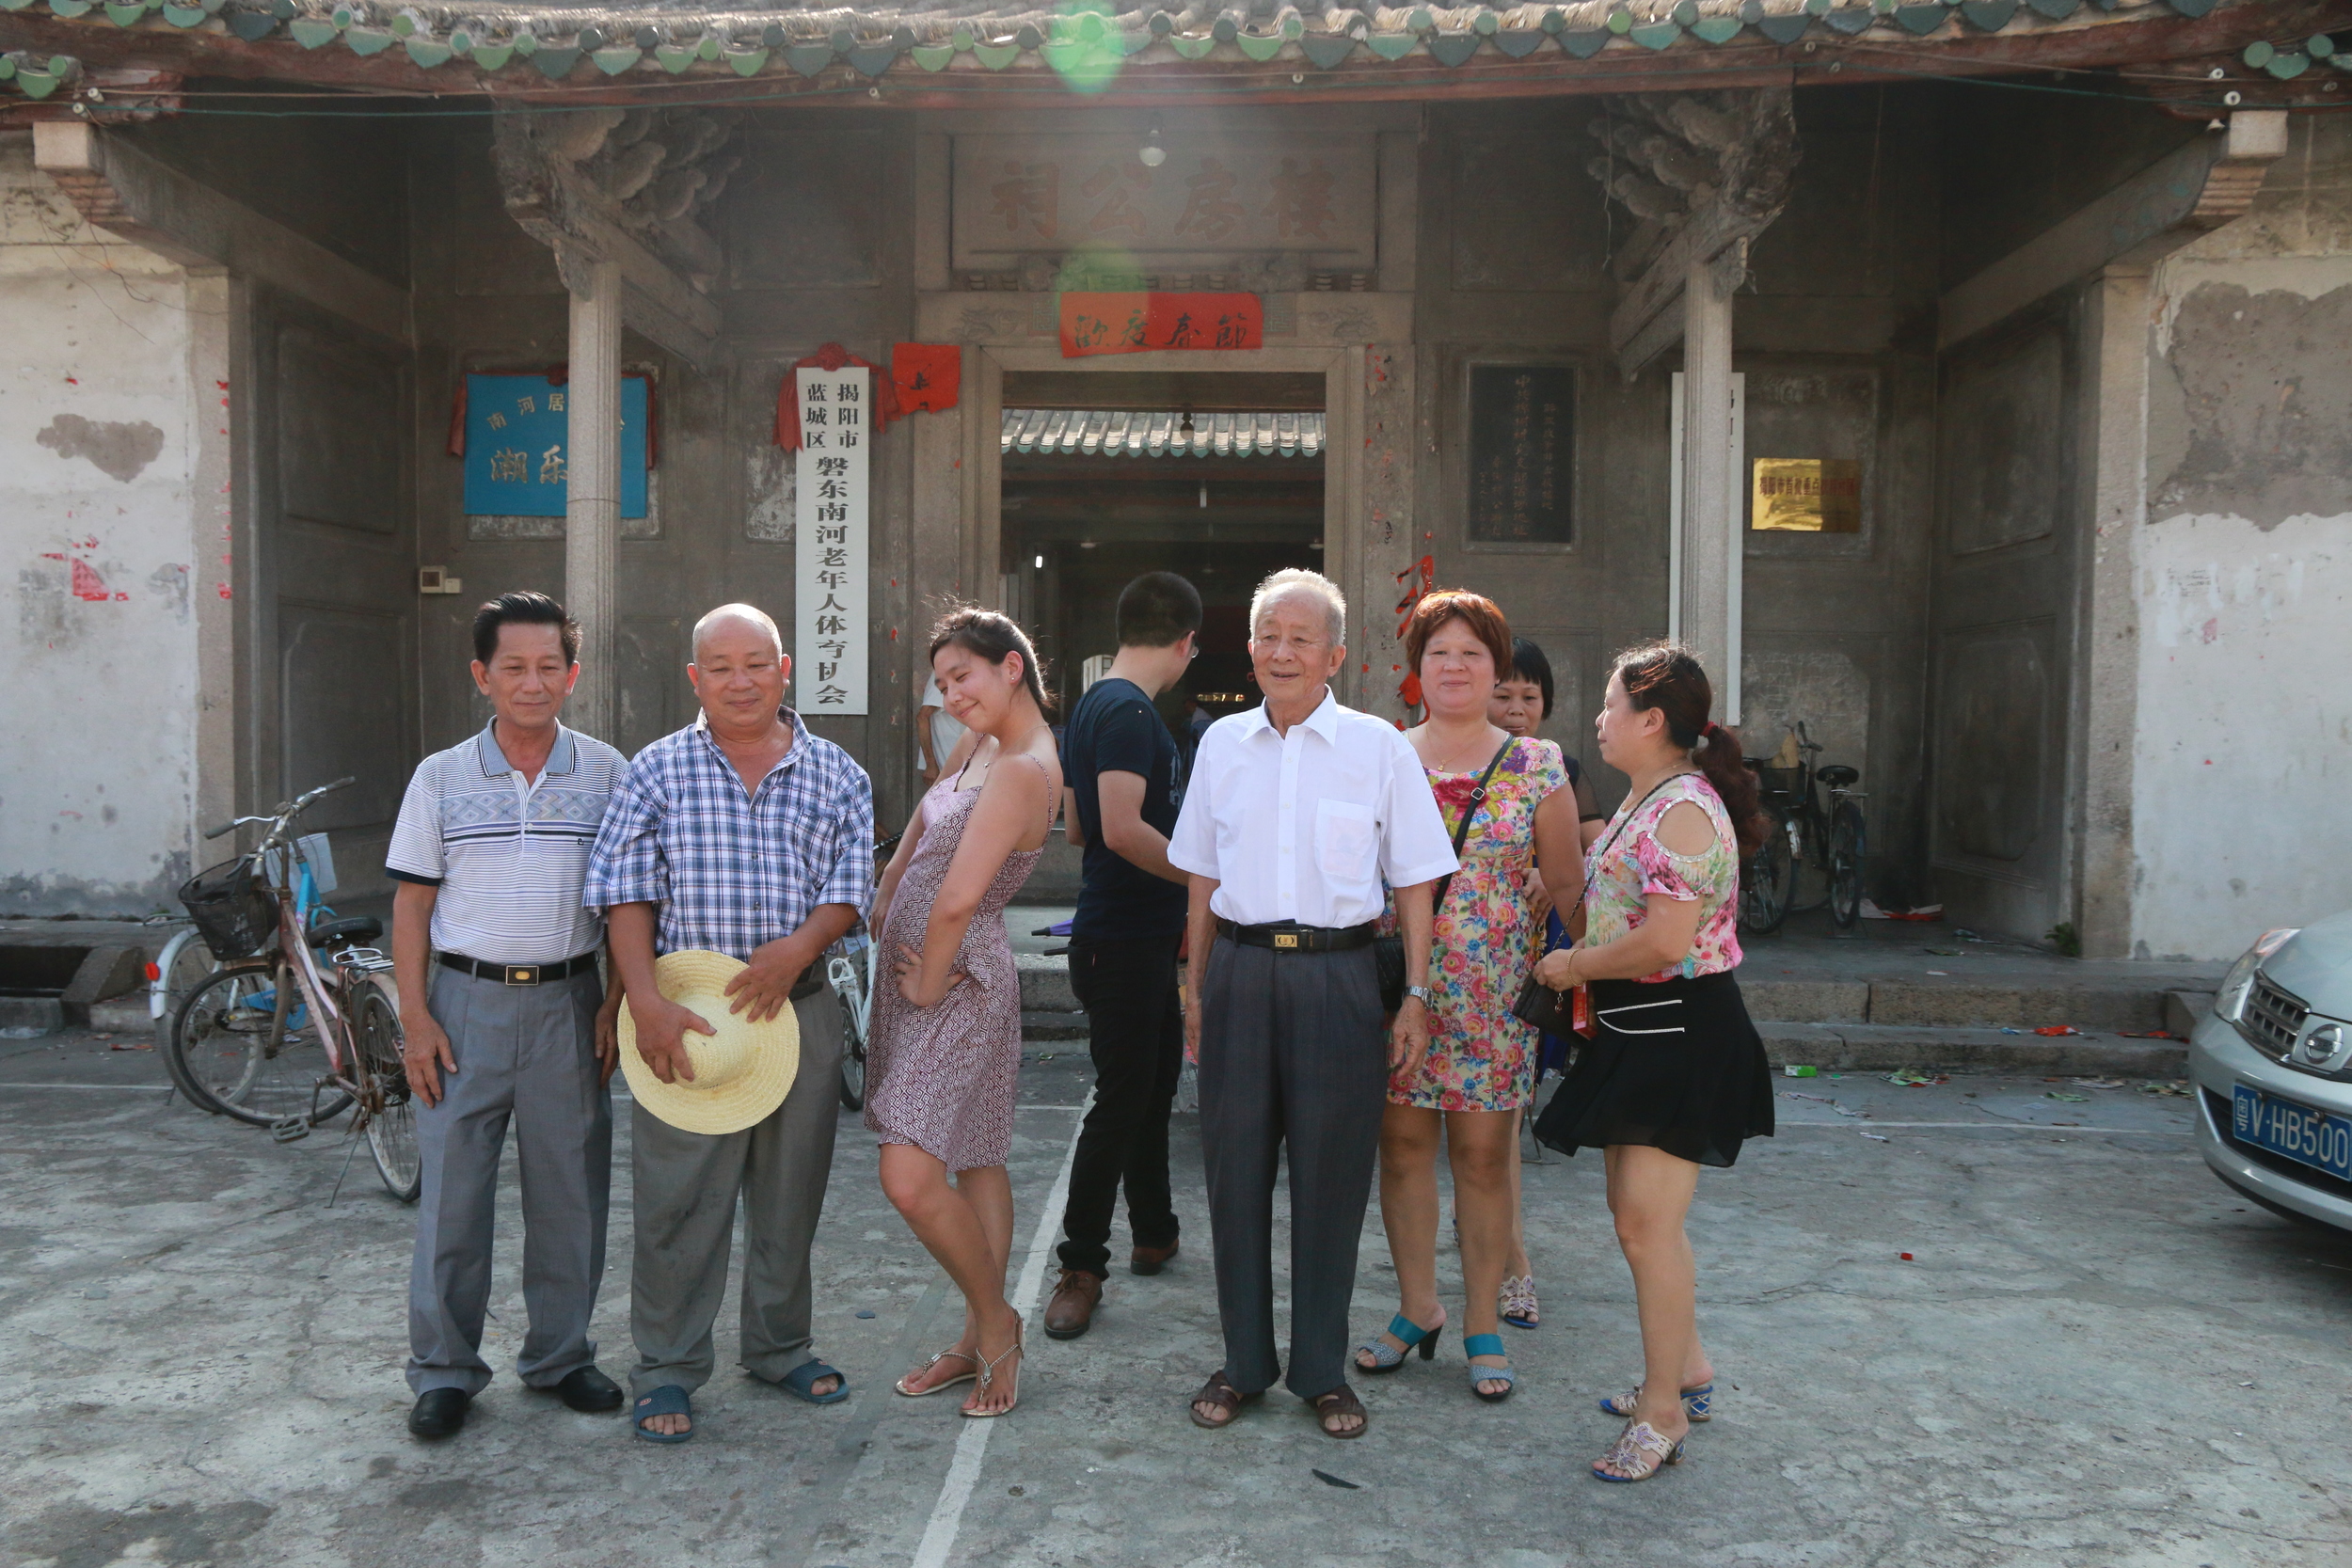 Getting ready for a family group photo in front of ancestral hall